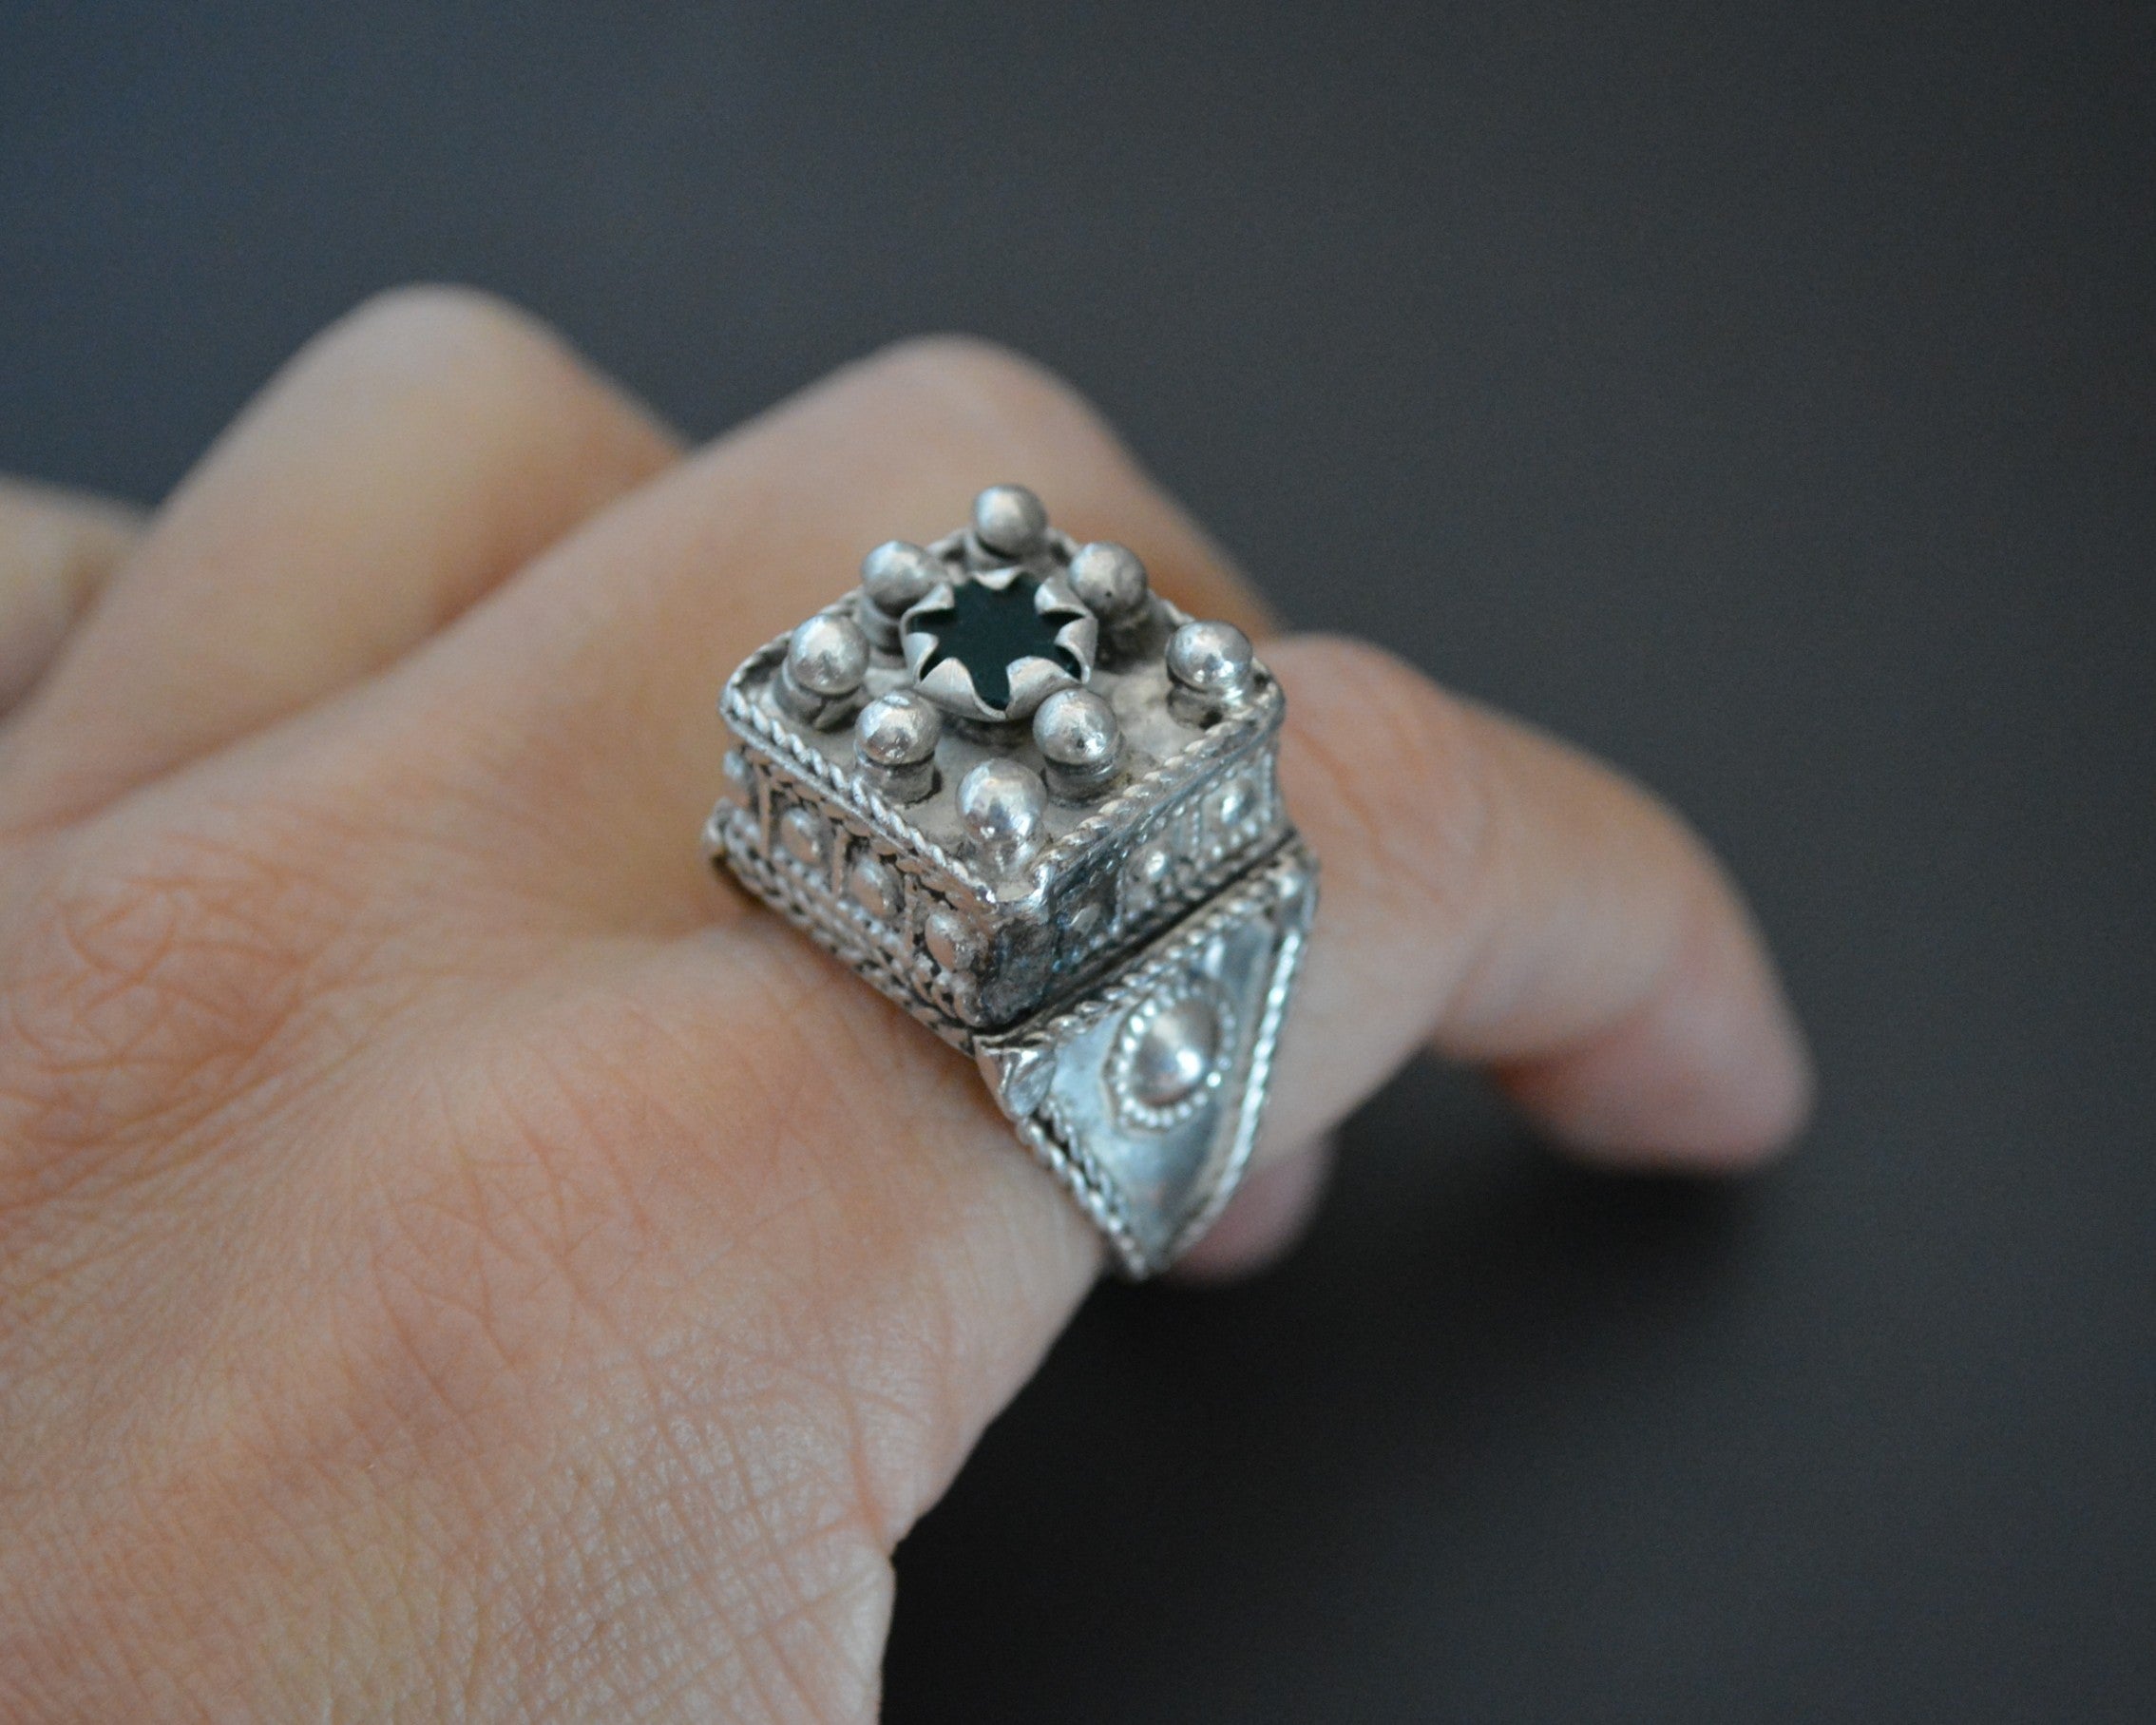 Pashtun Silver Ring with Glass - Size 7